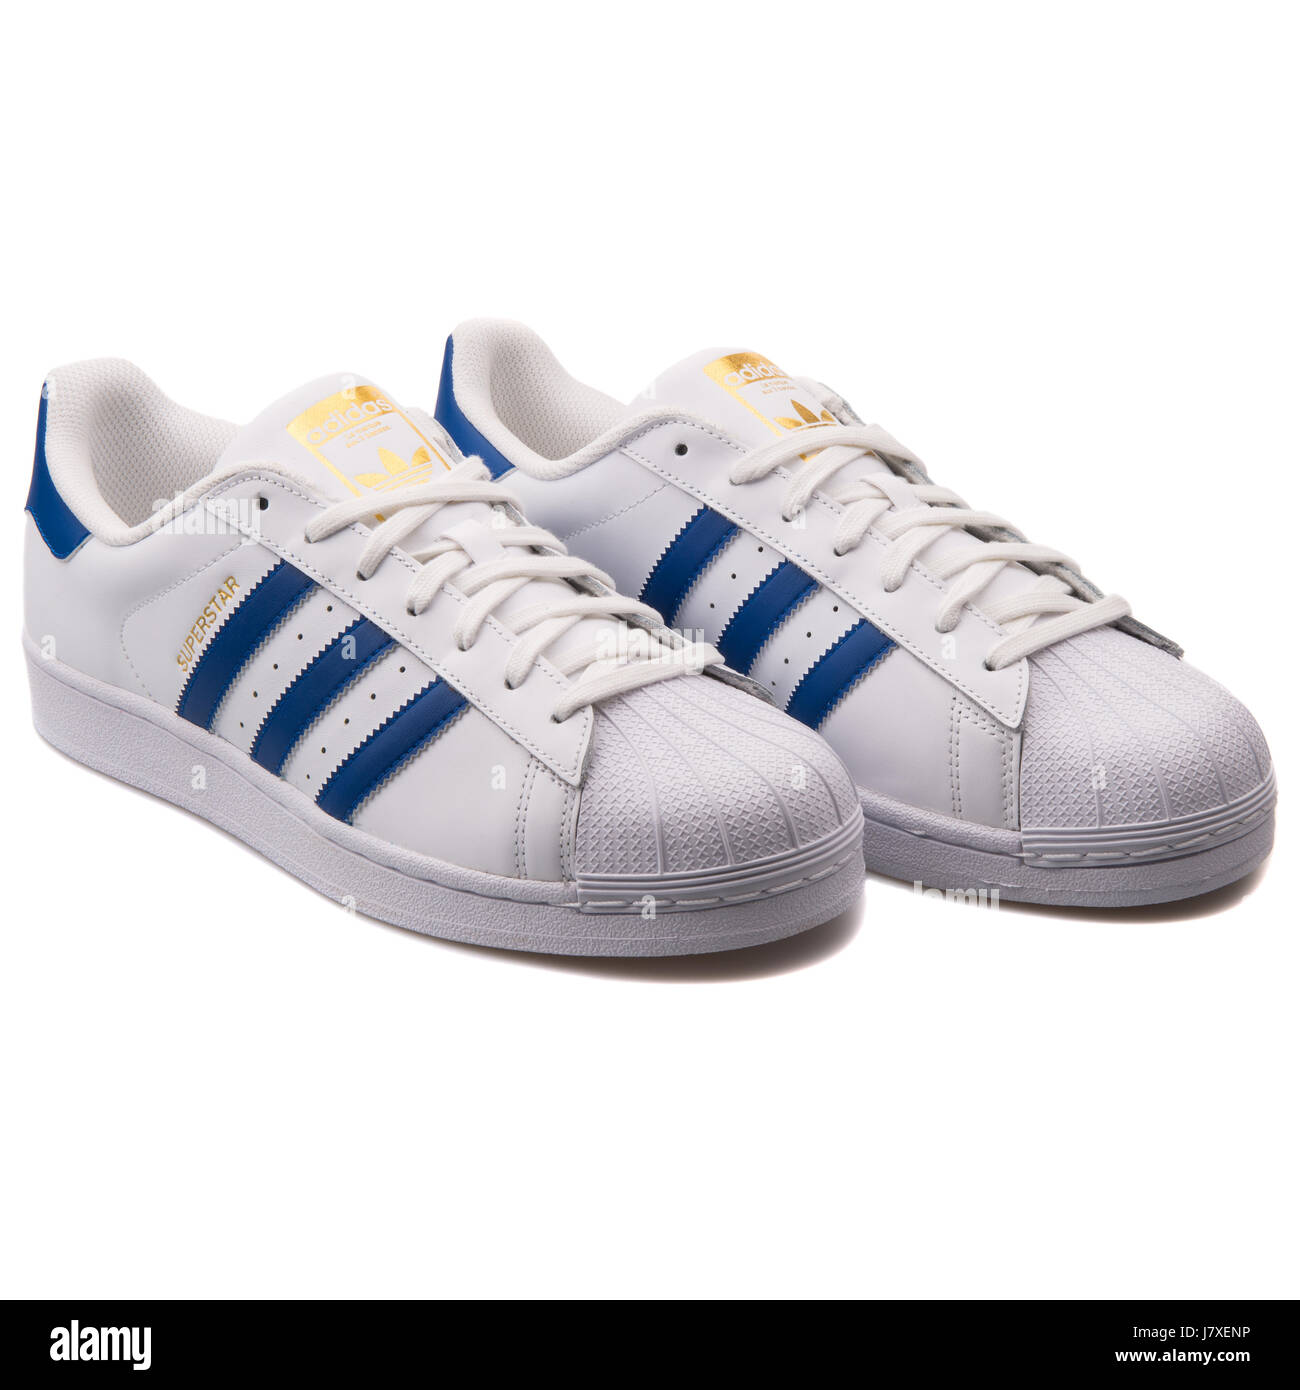 Adidas Superstar Foundation Men's Leather White with Blue Sneakers - B27141  Stock Photo - Alamy